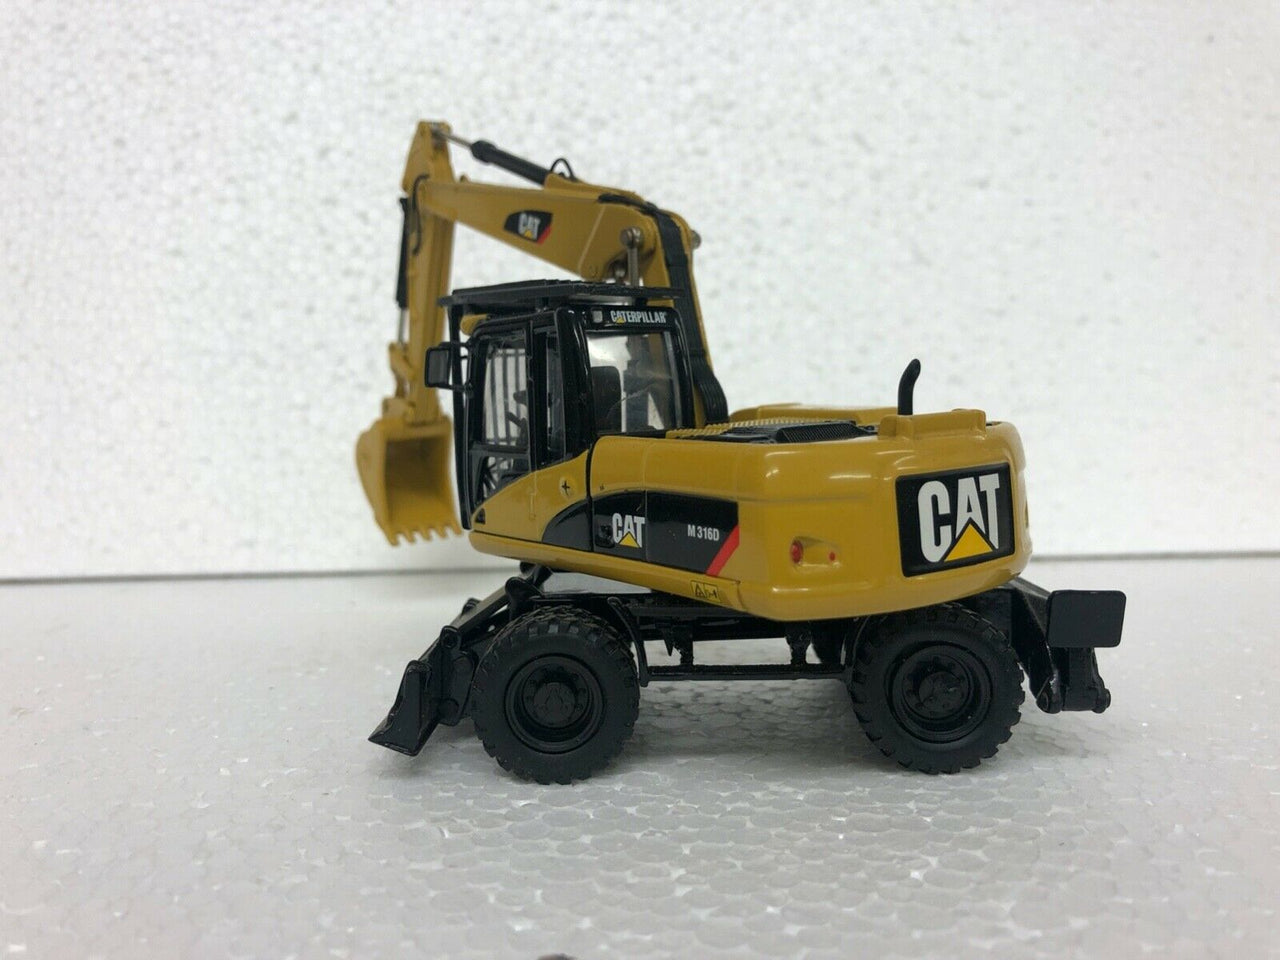 55171 Caterpillar M316D Wheeled Excavator Scale 1:50 (Discontinued Model)